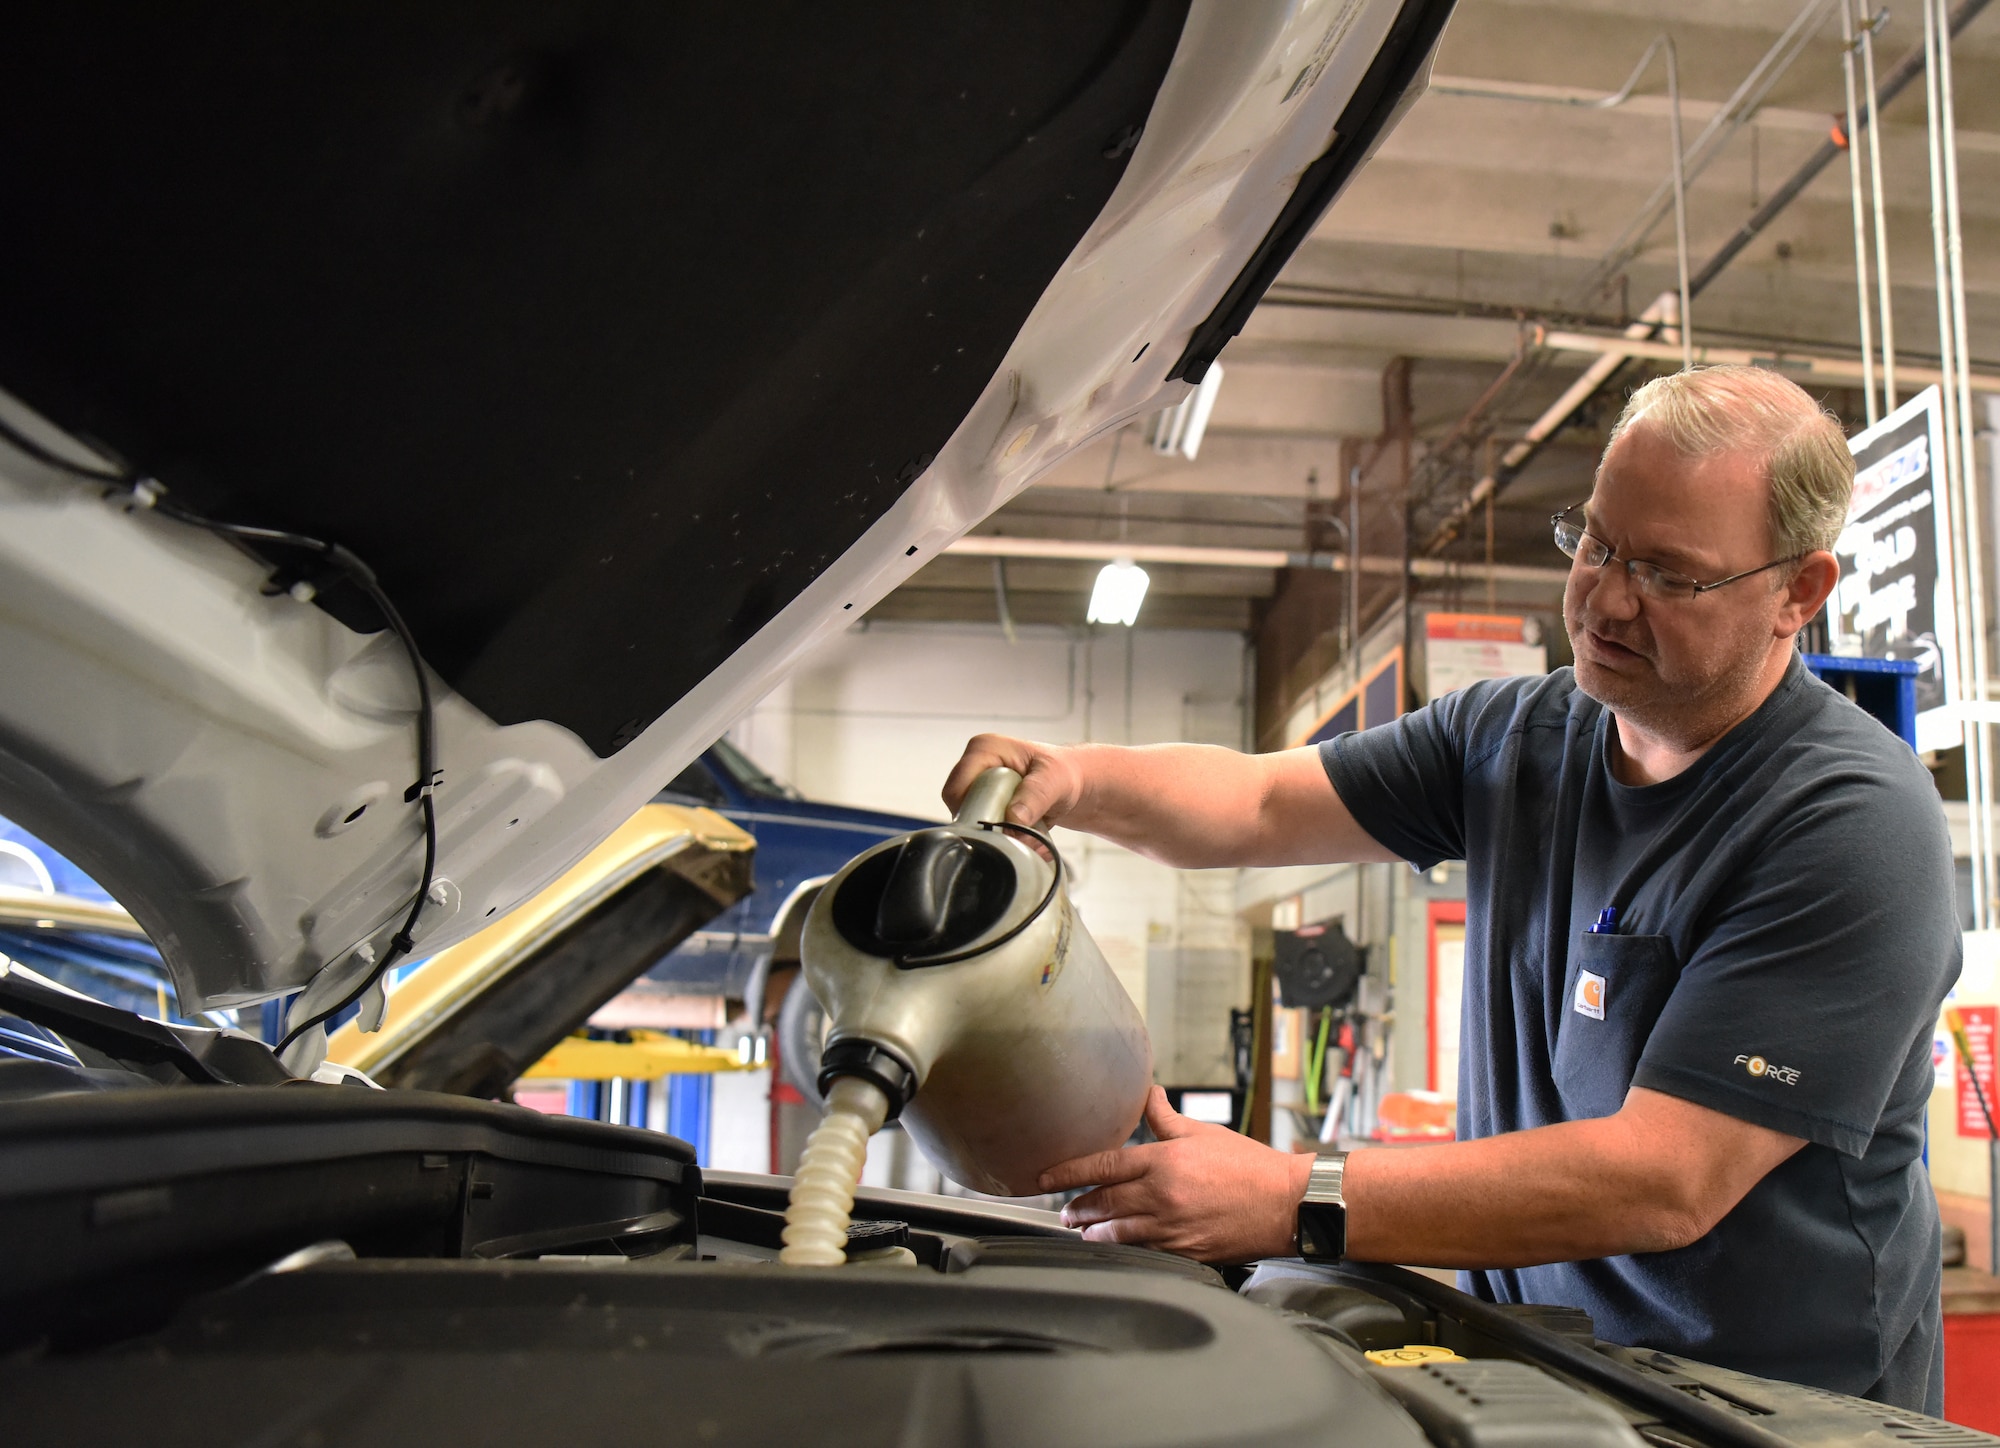 Paul Balcom, the auto hobby shop manager, pours oil into the engine of a vehicle at Ellsworth Air Force Base, S.D., Aug. 15, 2018. The mechanics at the hobby shop are here to help Airmen and their families with their automotive repair needs and to help car enthusiasts with their projects. (U.S. Air Force Photo by Airman 1st Class Thomas Karol)